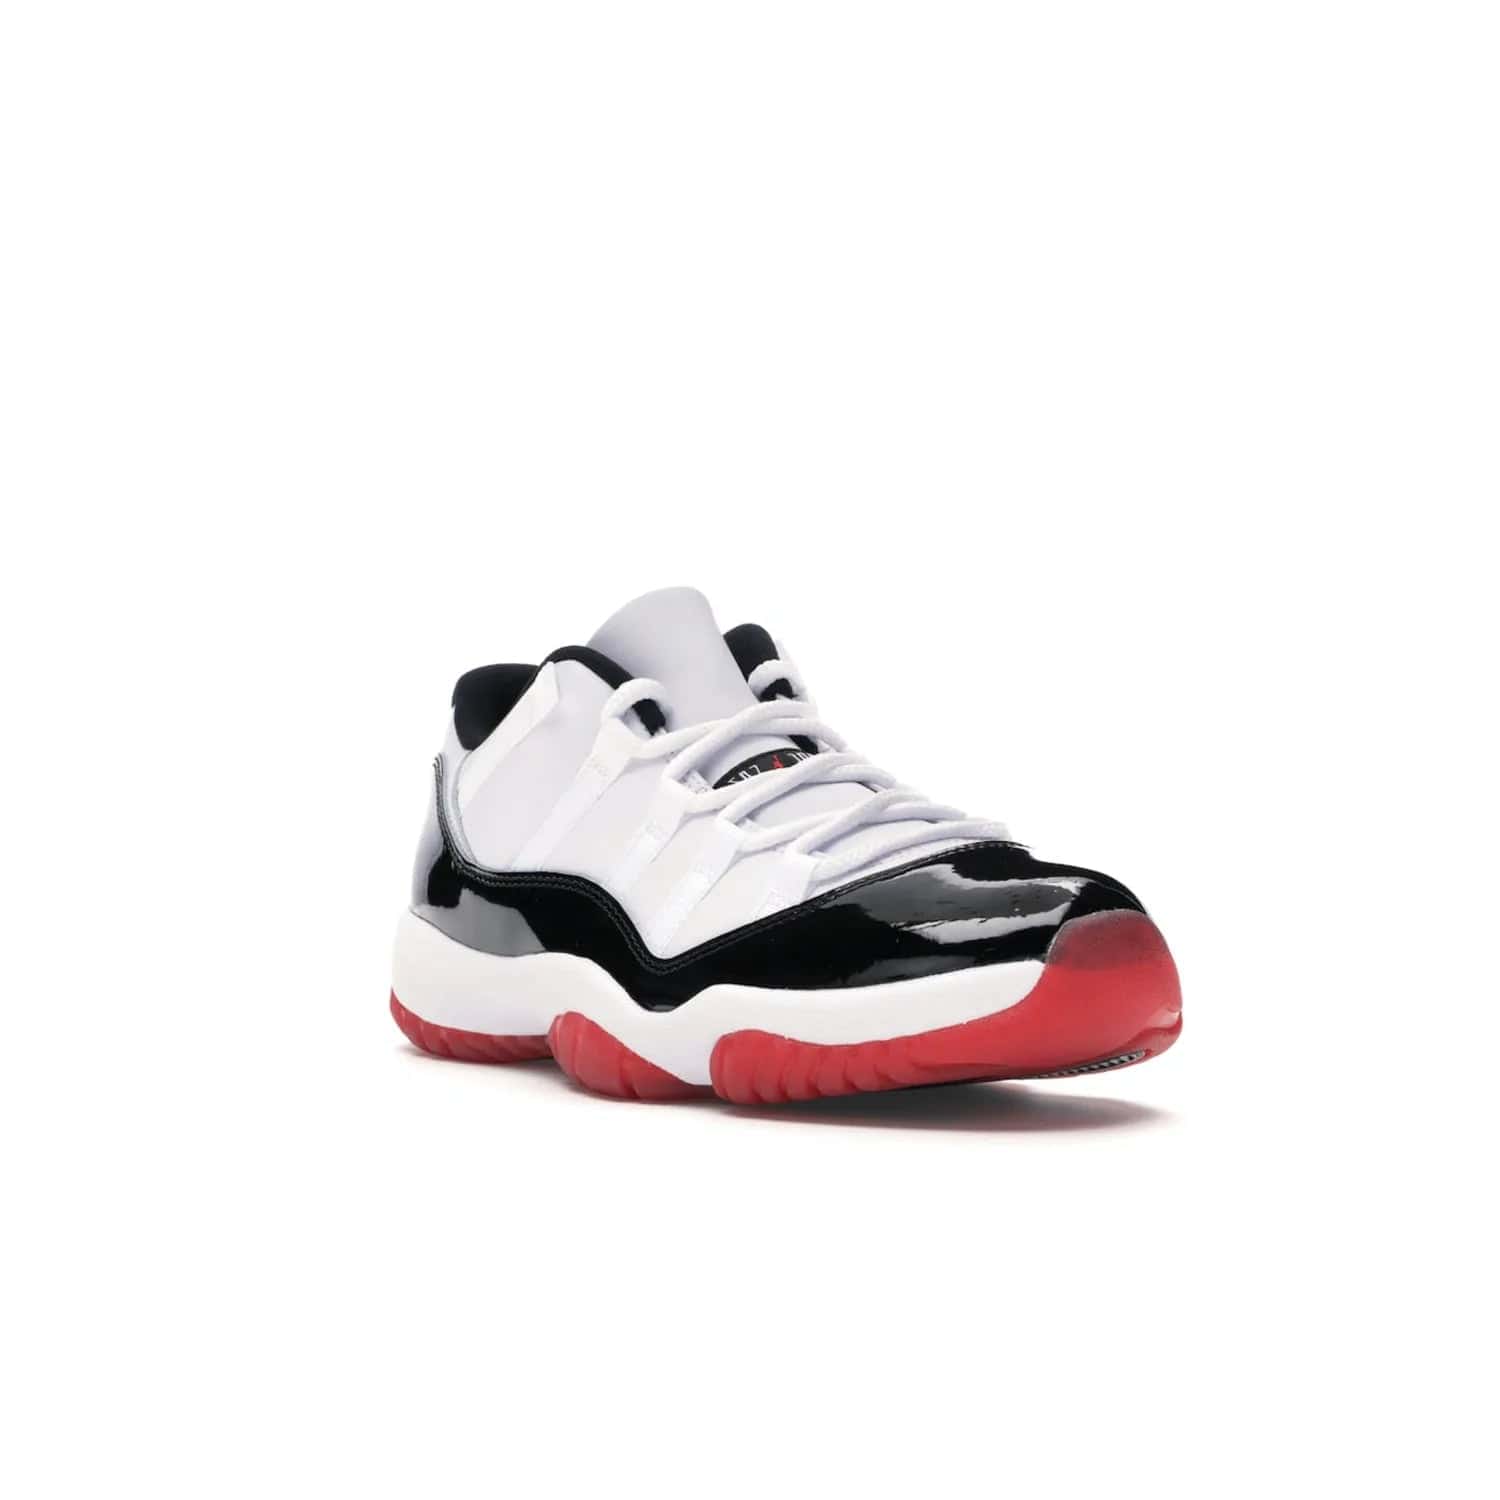 Jordan 11 Retro Low Concord Bred - Image 6 - Only at www.BallersClubKickz.com - Grab the classic Jordan 11 look with the Jordan 11 Retro Low Concord Bred. With white and black elements and the iconic red outsole of the Jordan 11 Bred, you won't miss a beat. Released in June 2020, the perfect complement to any outfit.